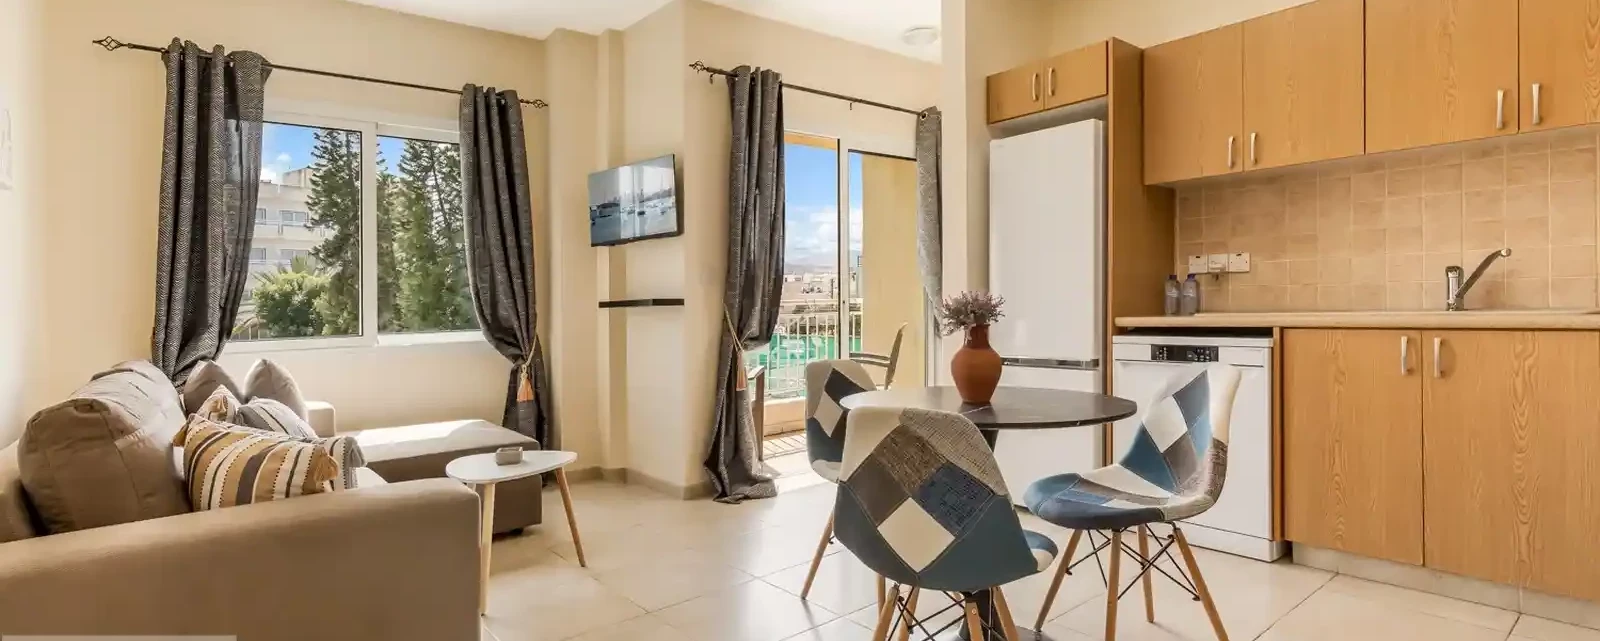 1-bedroom apartment fоr sаle €119.000, image 1